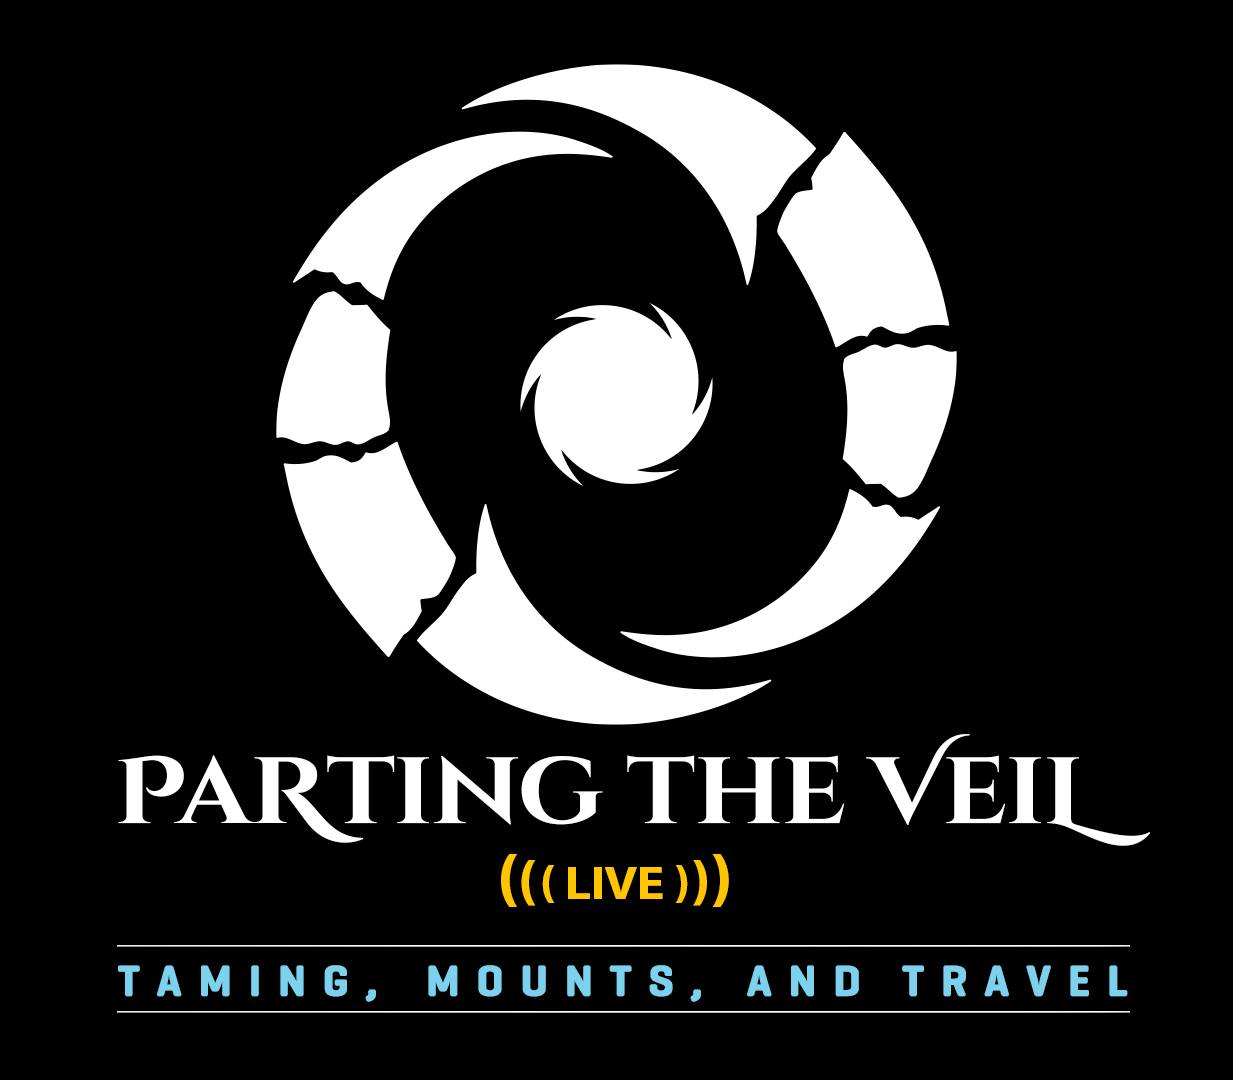 2022-Sep 20: promo for Parting the Veil show with modified Pantheon logo